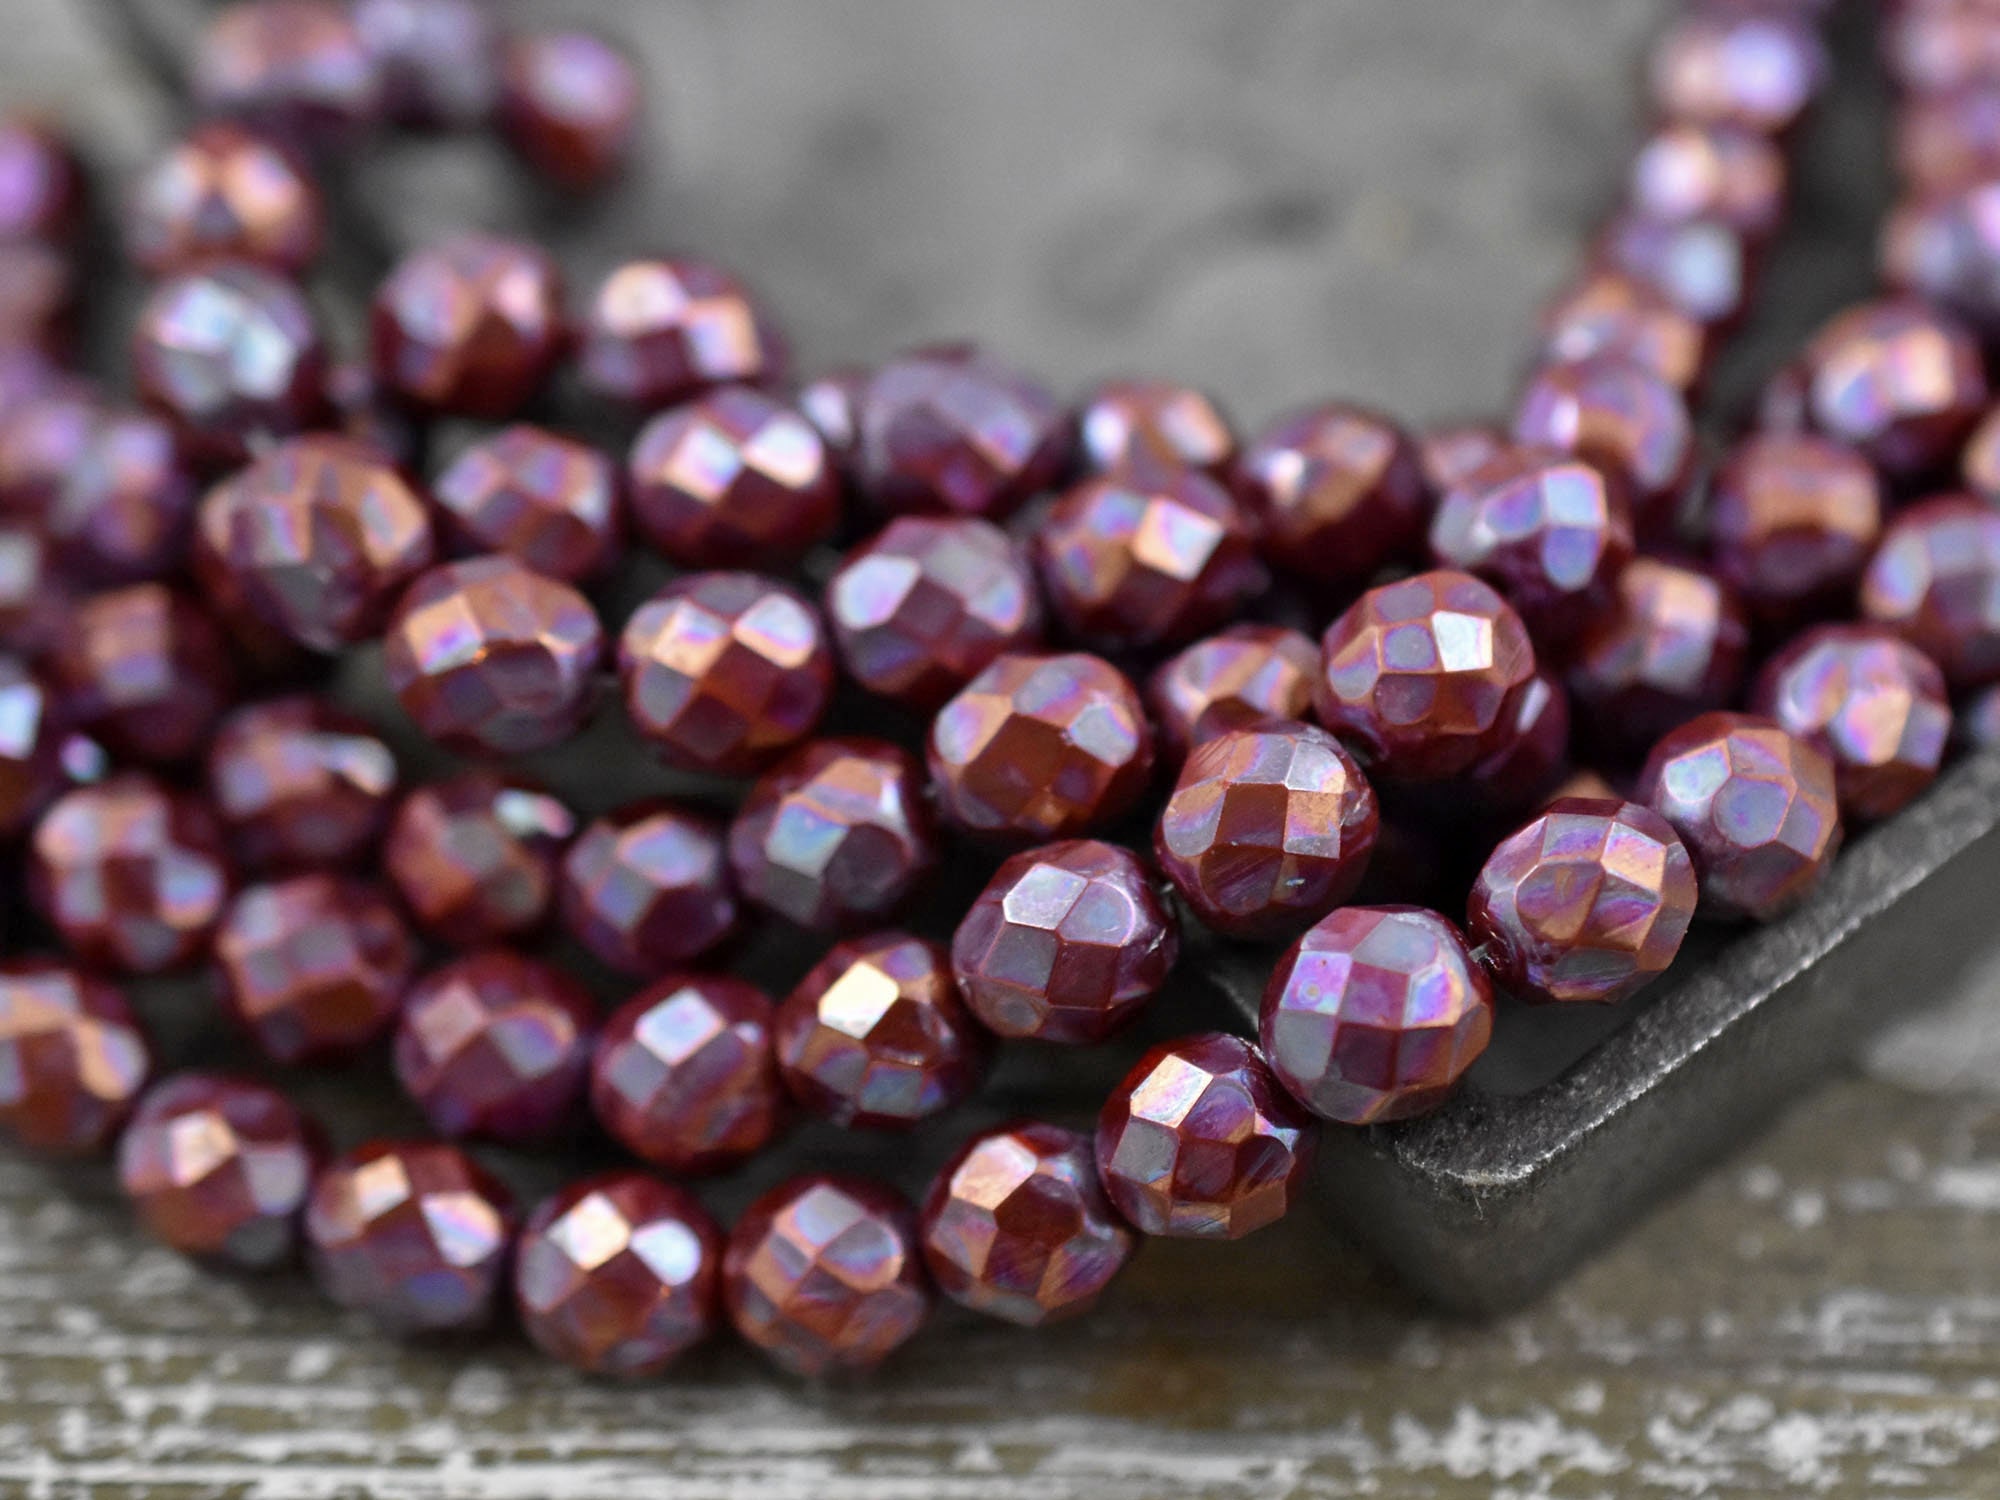 6mm beads Red fire polished beads Czech faceted 6mm beads (35) Opaque round  glass Nr 2